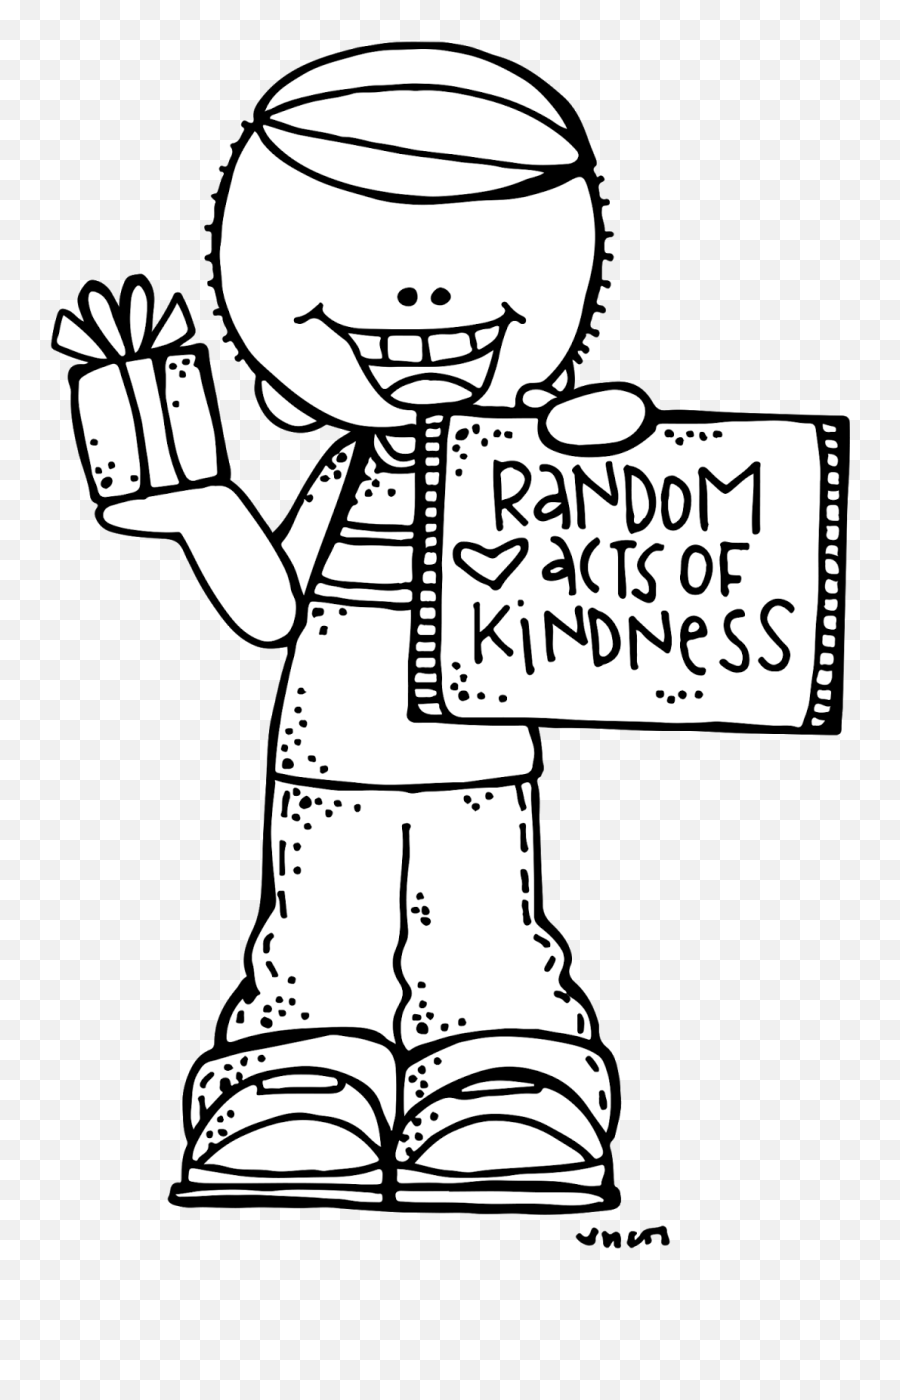 One Little Tiny Act Of Kindness Can - Random Acts Of Kindness Clipart Black And White Emoji,Kindness Clipart